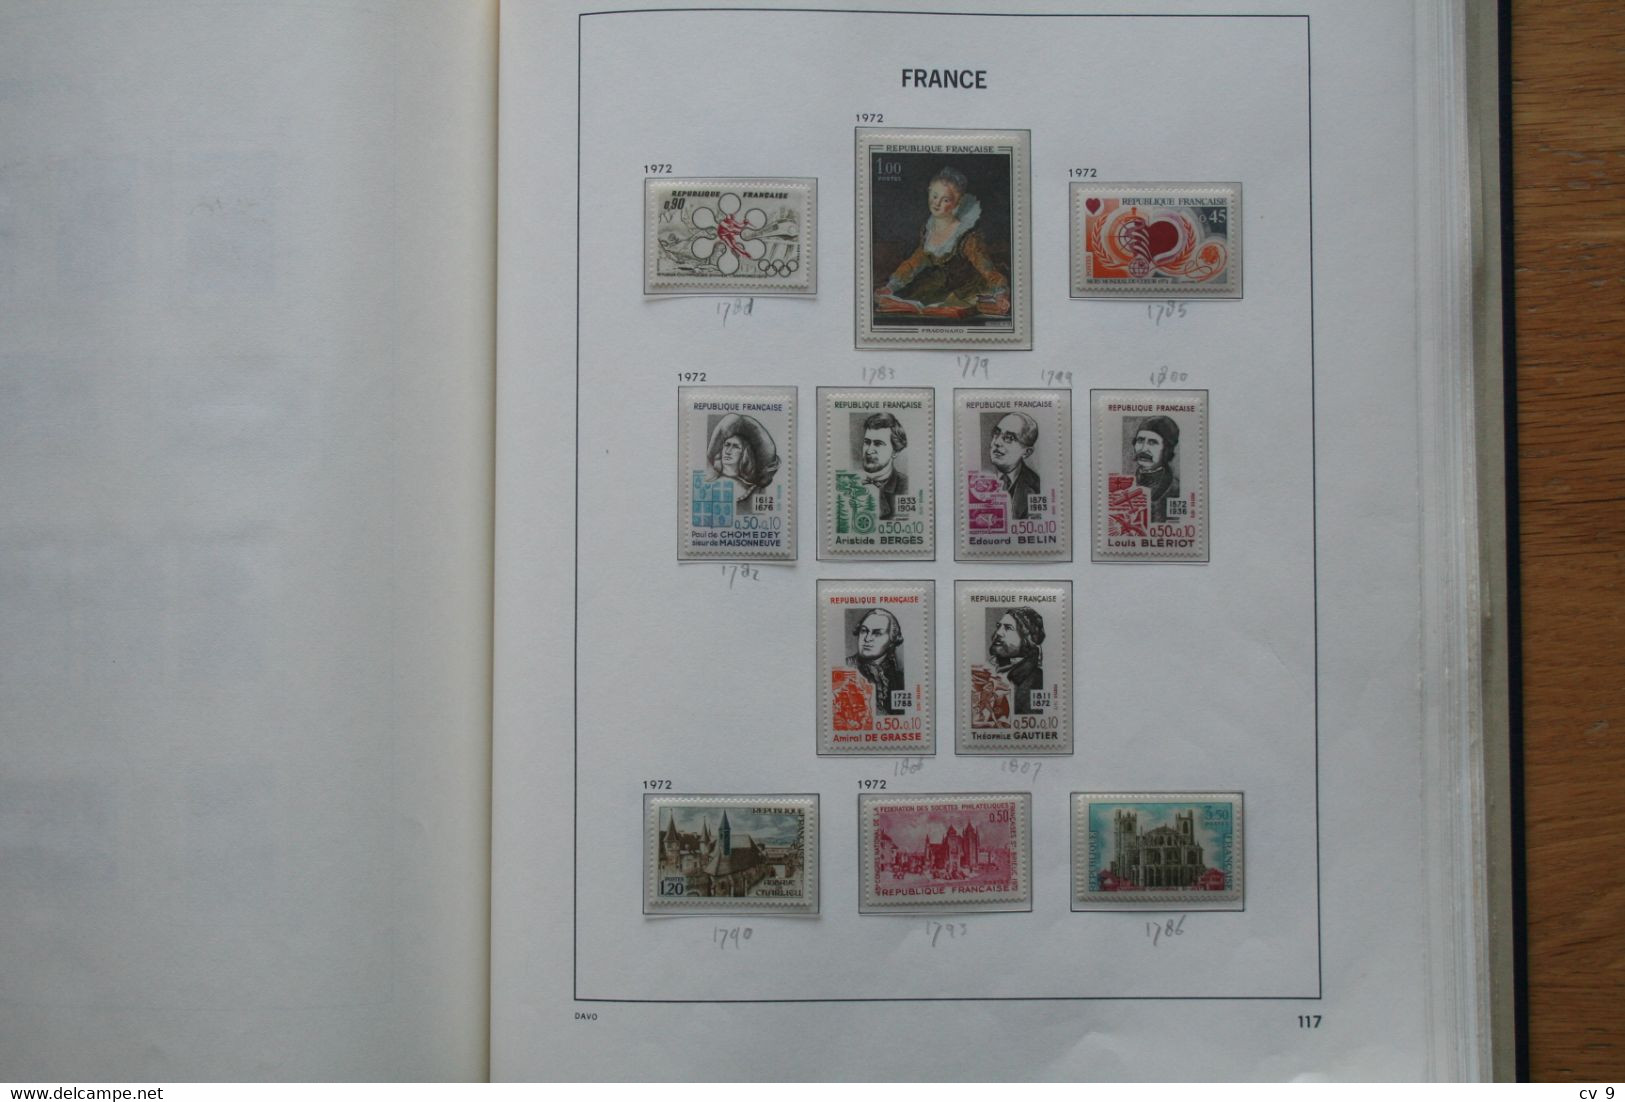 DAVO ALBUM FRANCE FRANKREICH FRANKRIJK year 1849-1979  with lots of stamps See Pictures